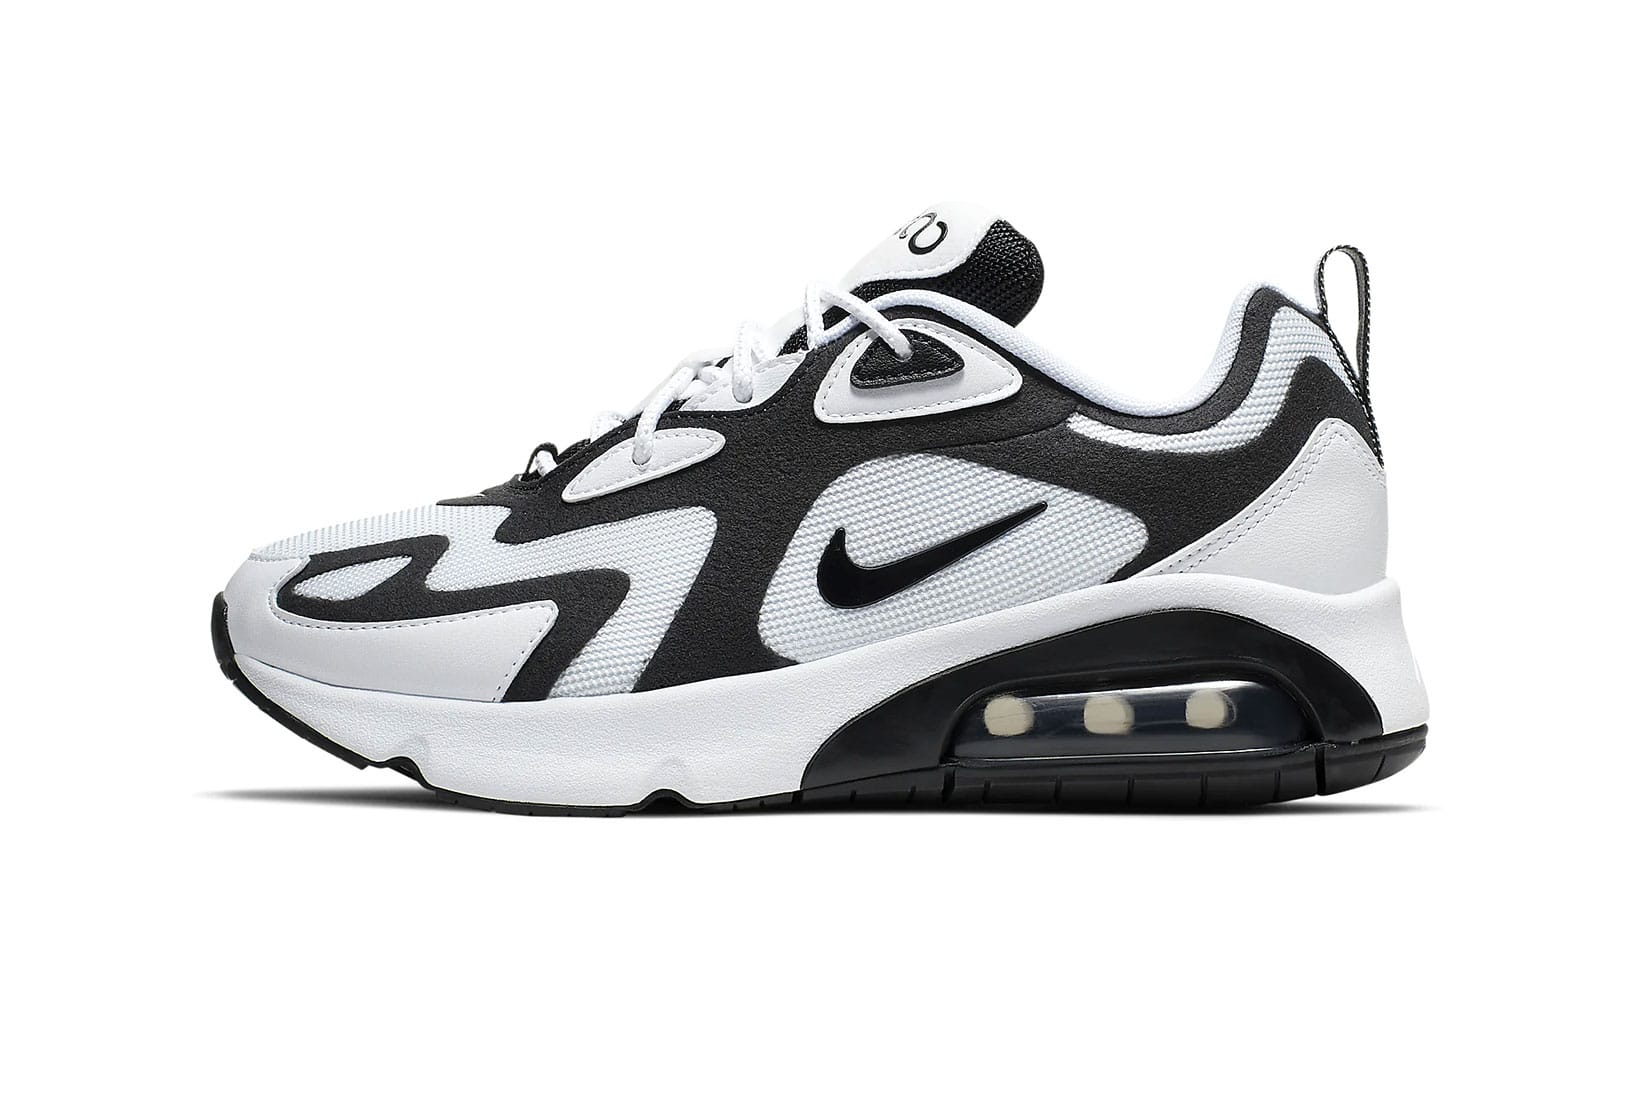 when did the air max 200 come out